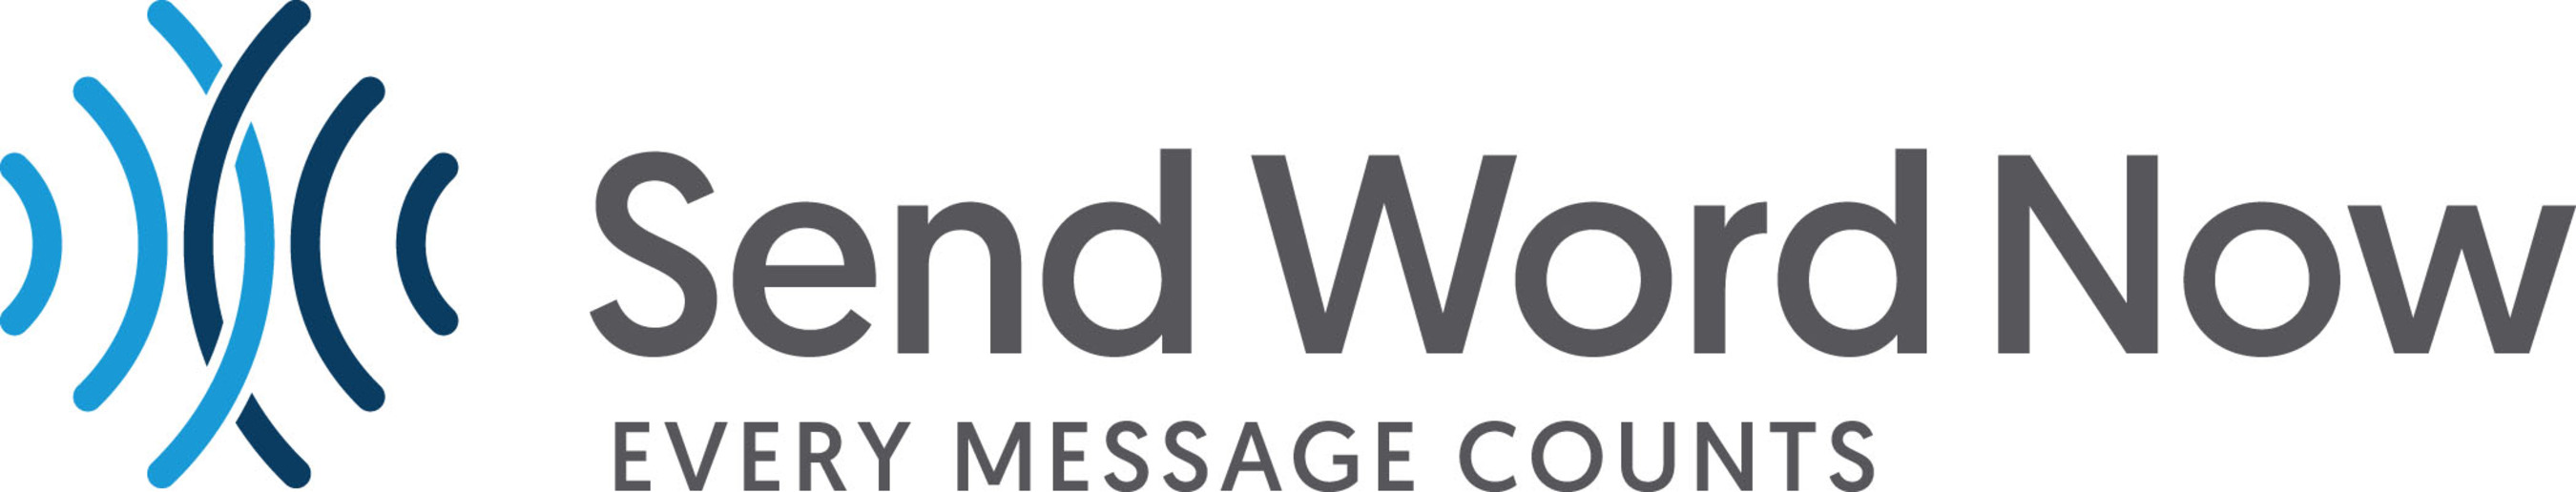 Send Word Now is the worldwide leader in critical communications solutions for the enterprise.